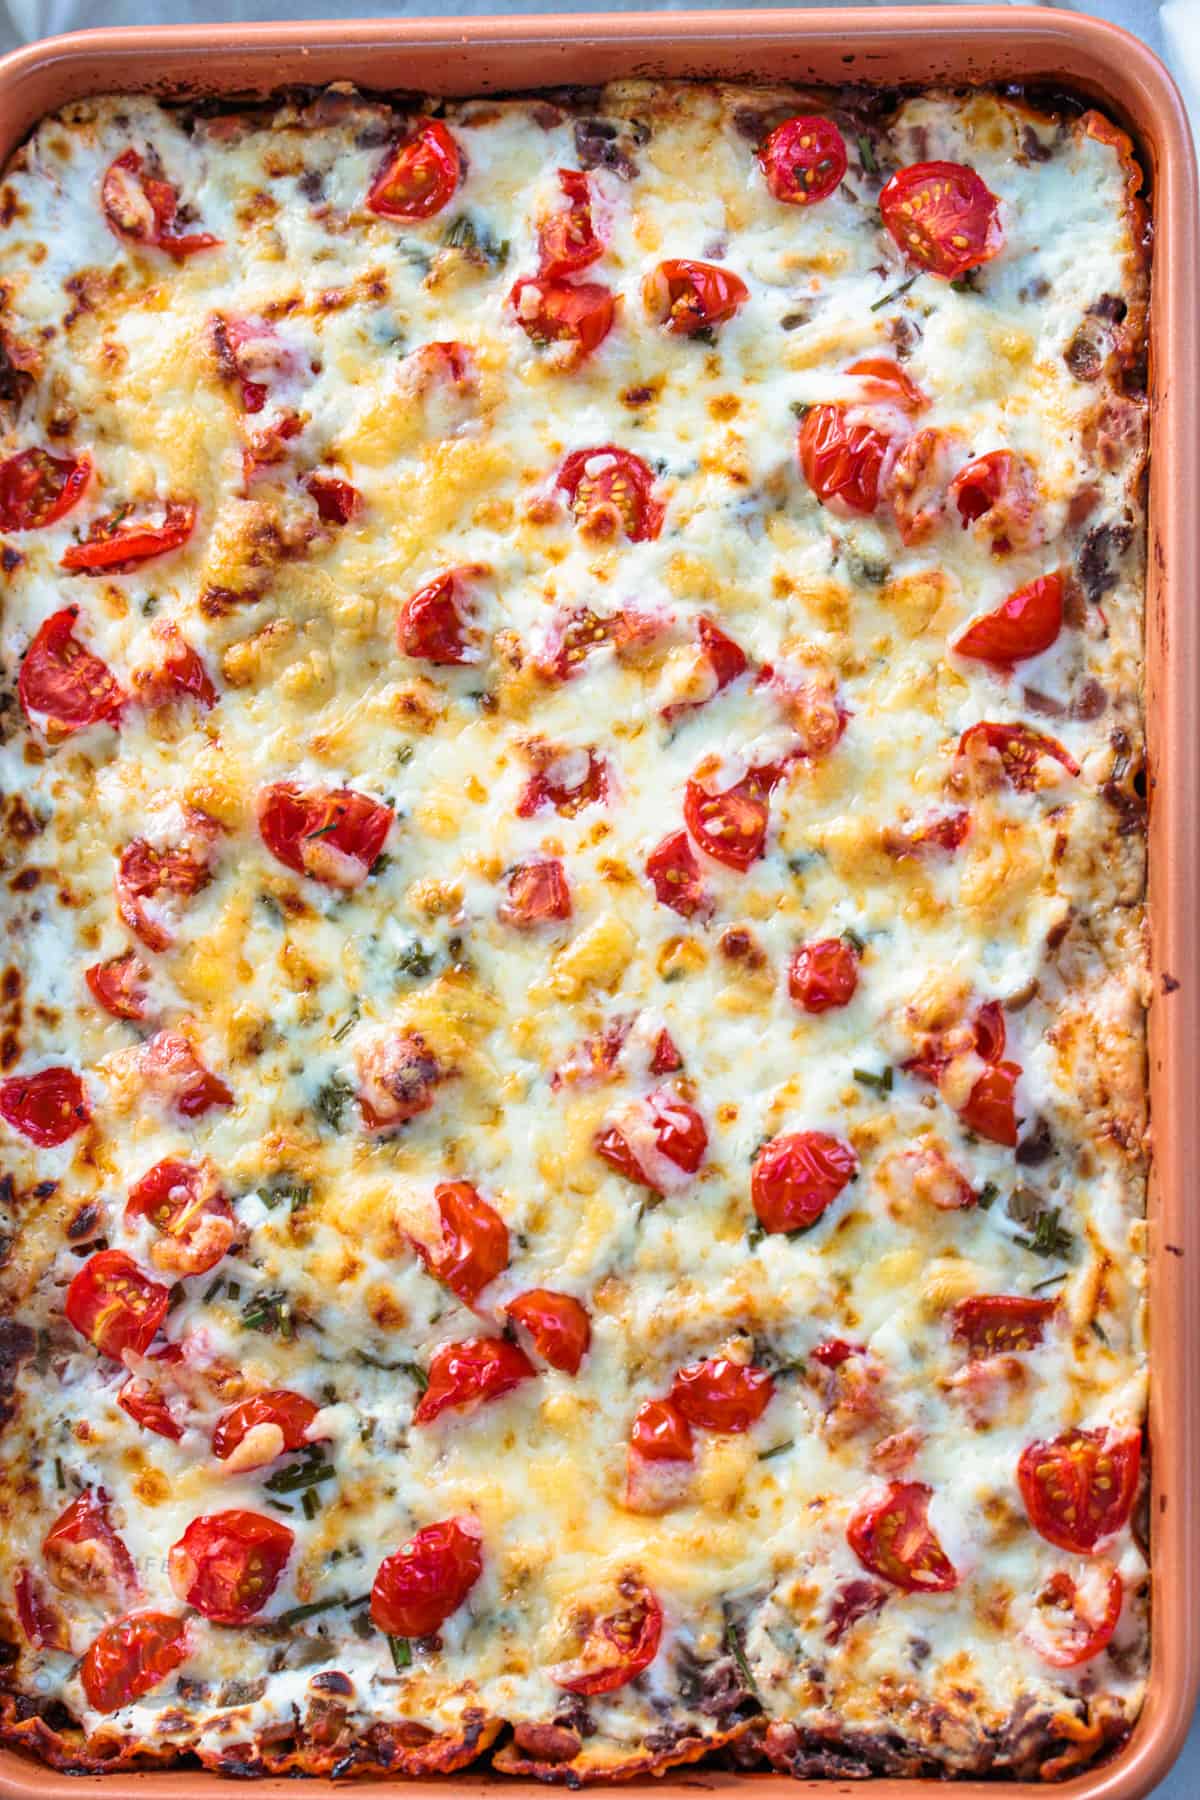 Mexican Lasagna cooked in the casserole dish